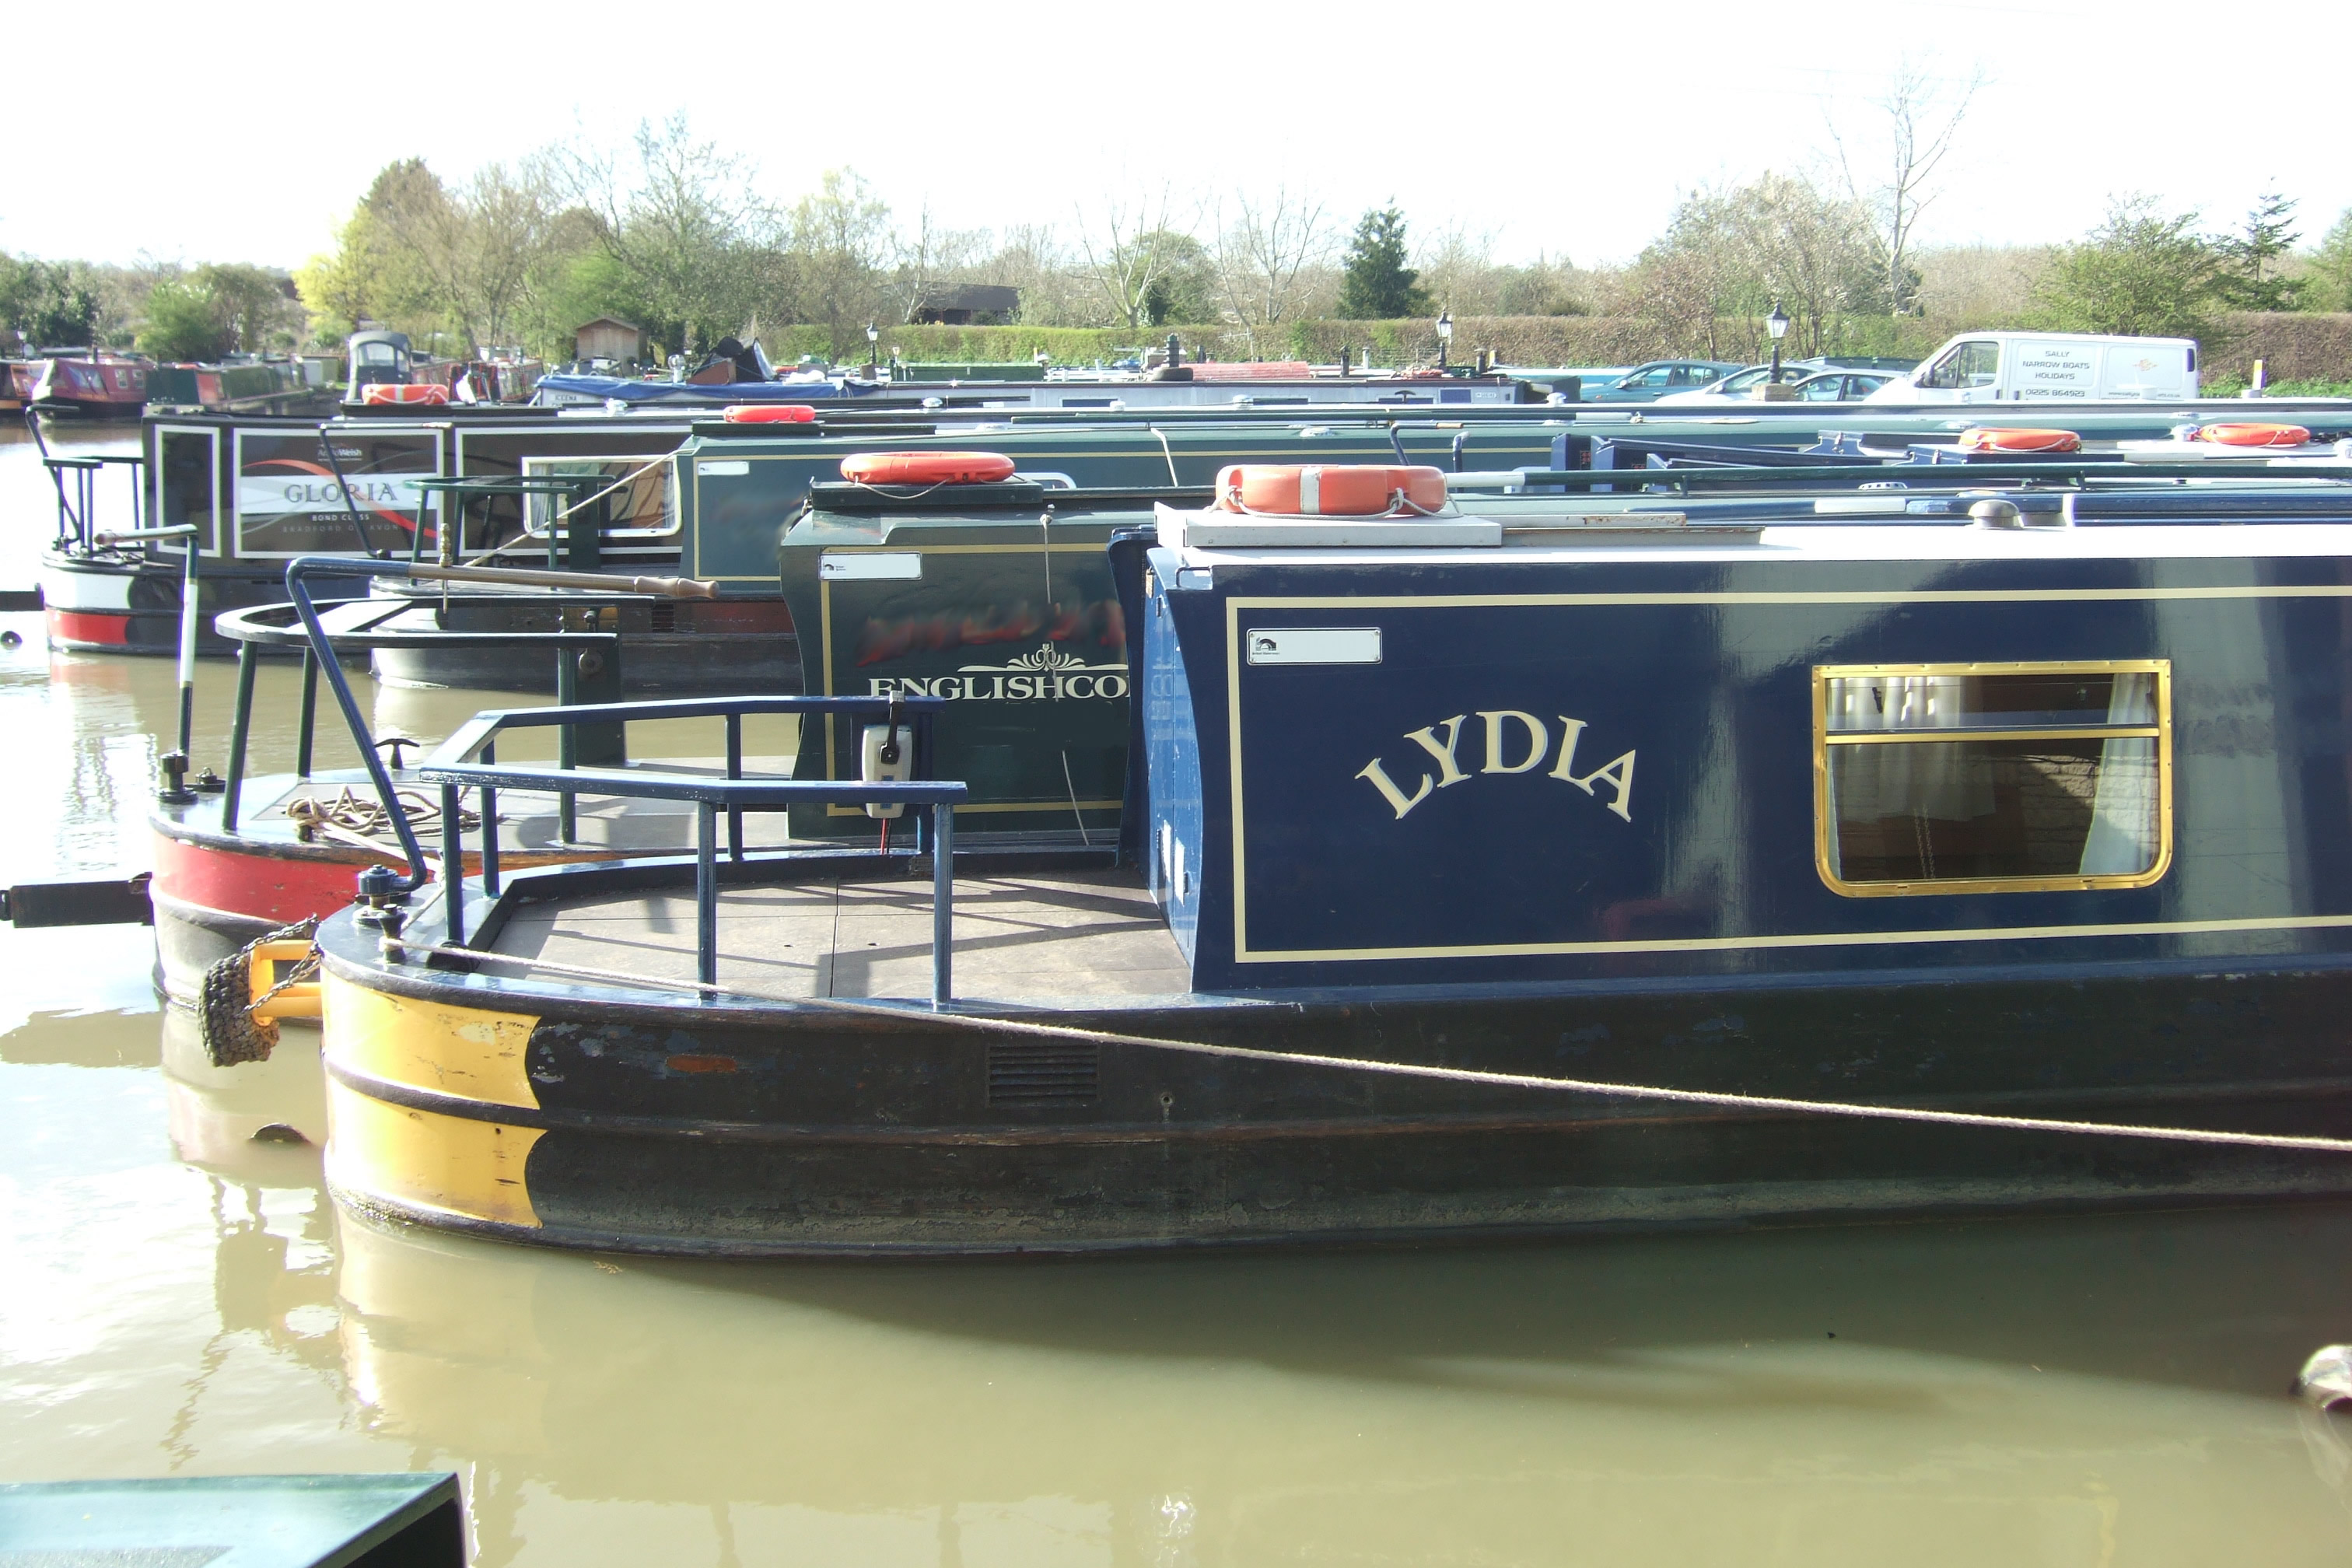 The S-Lydia class canal boat